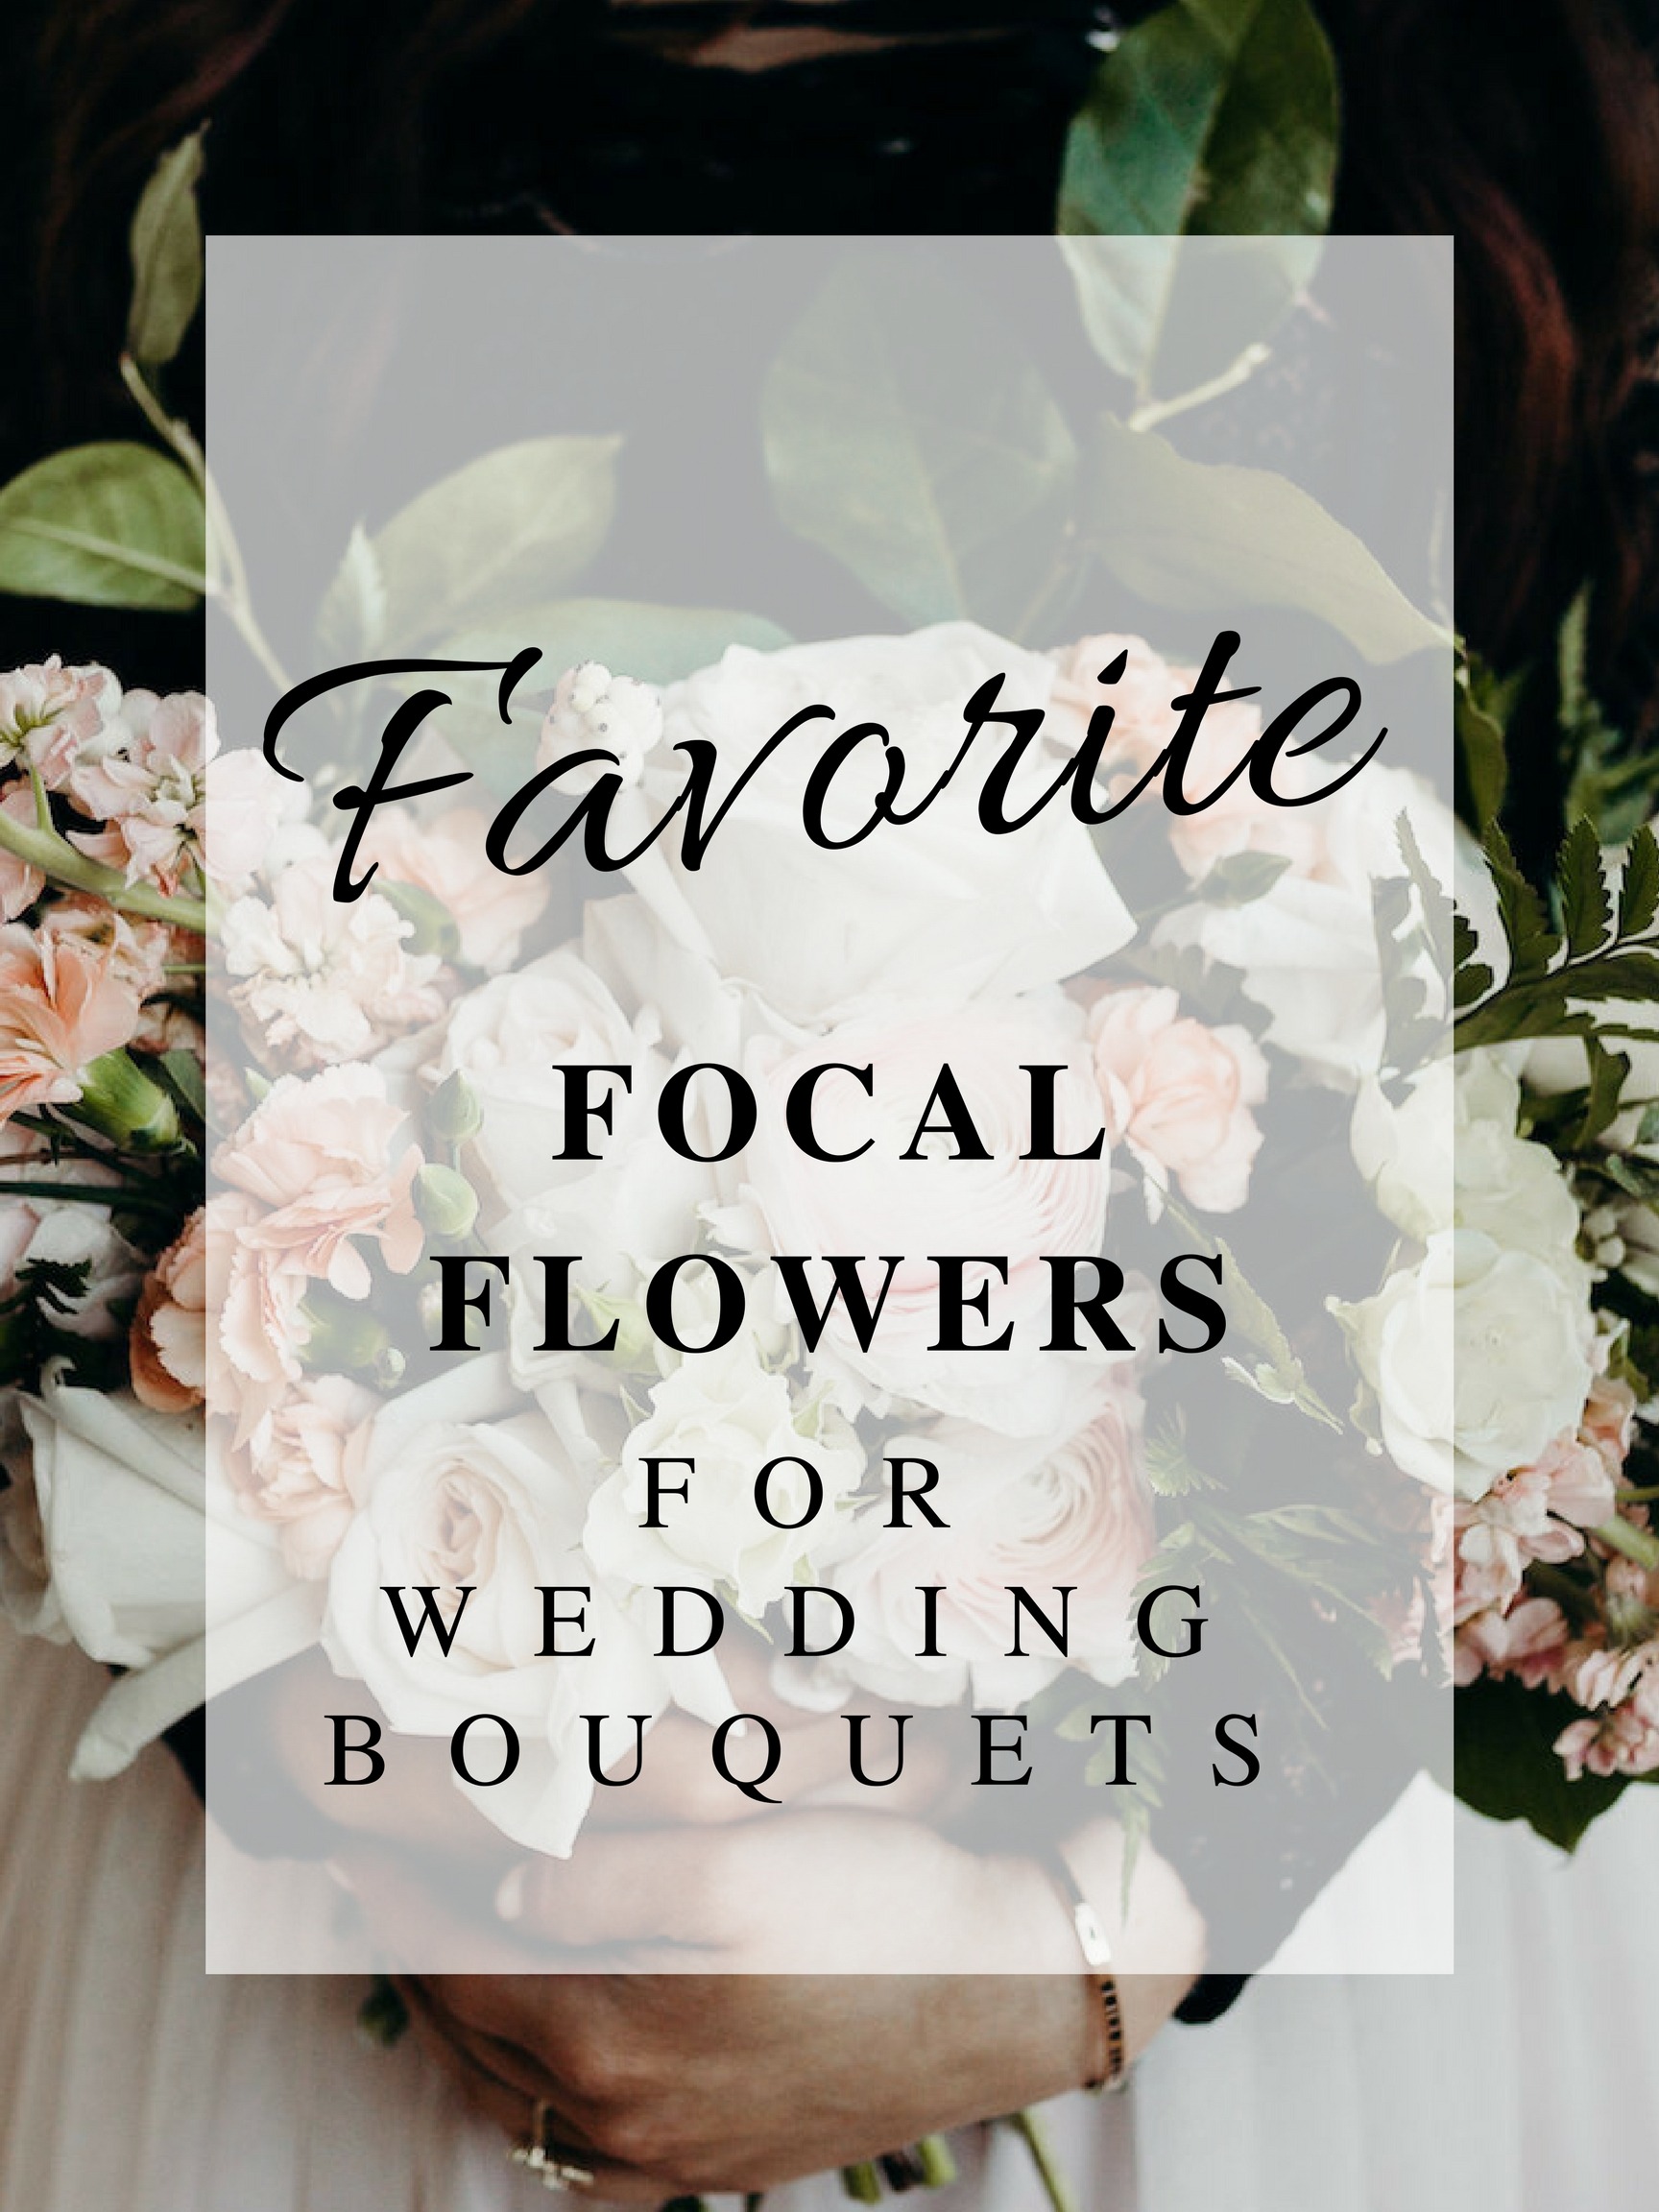 Favorite Focal Flowers for Bouquets